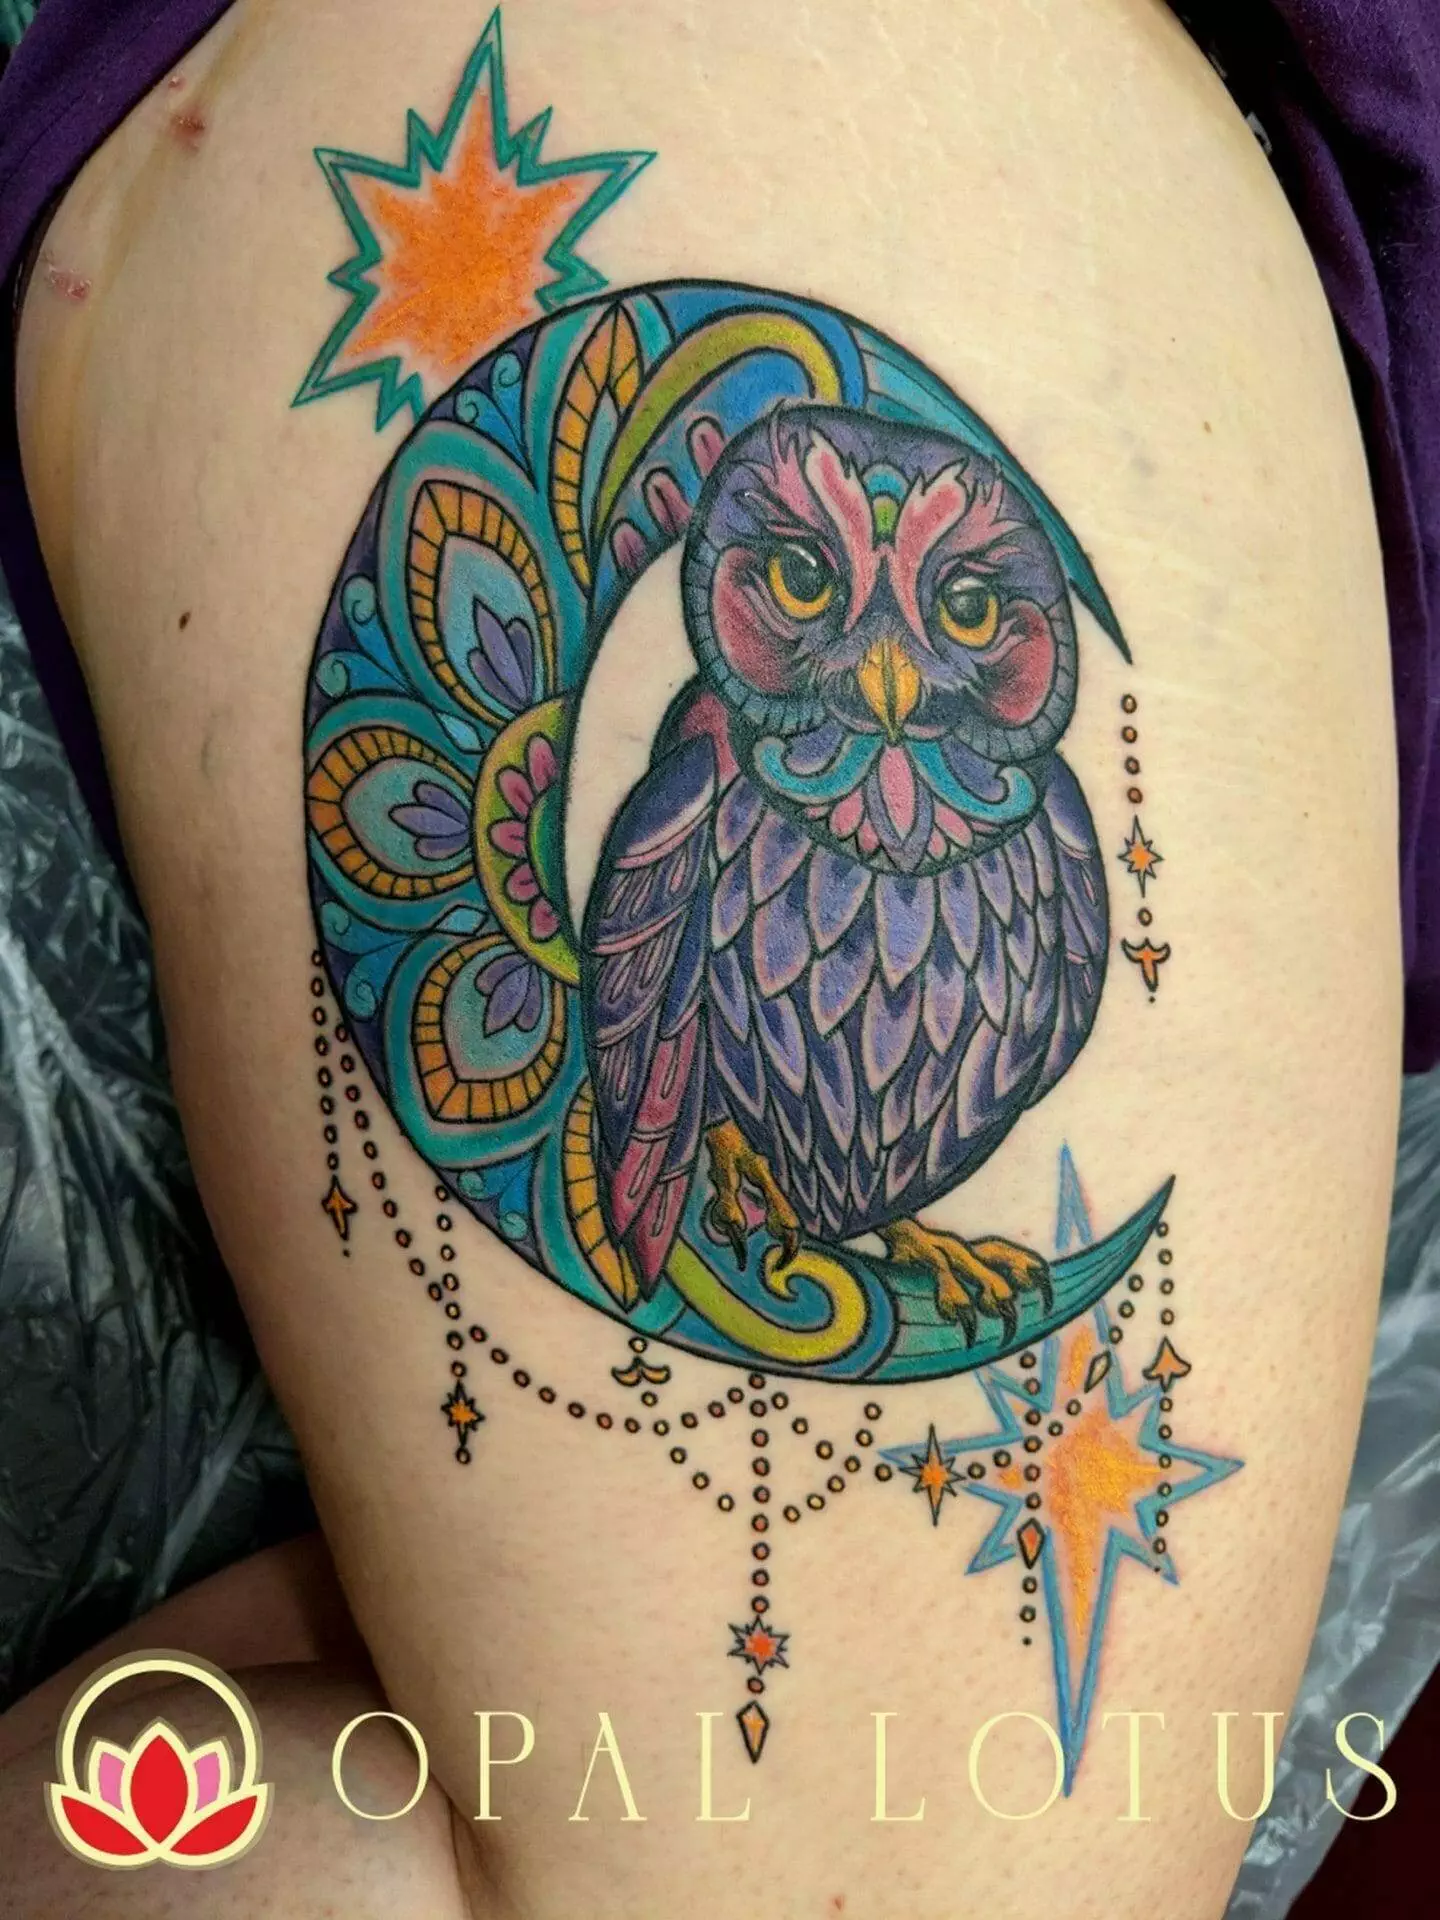 A neo-traditional tattoo featuring a katy-inspired owl perched on a crescent.